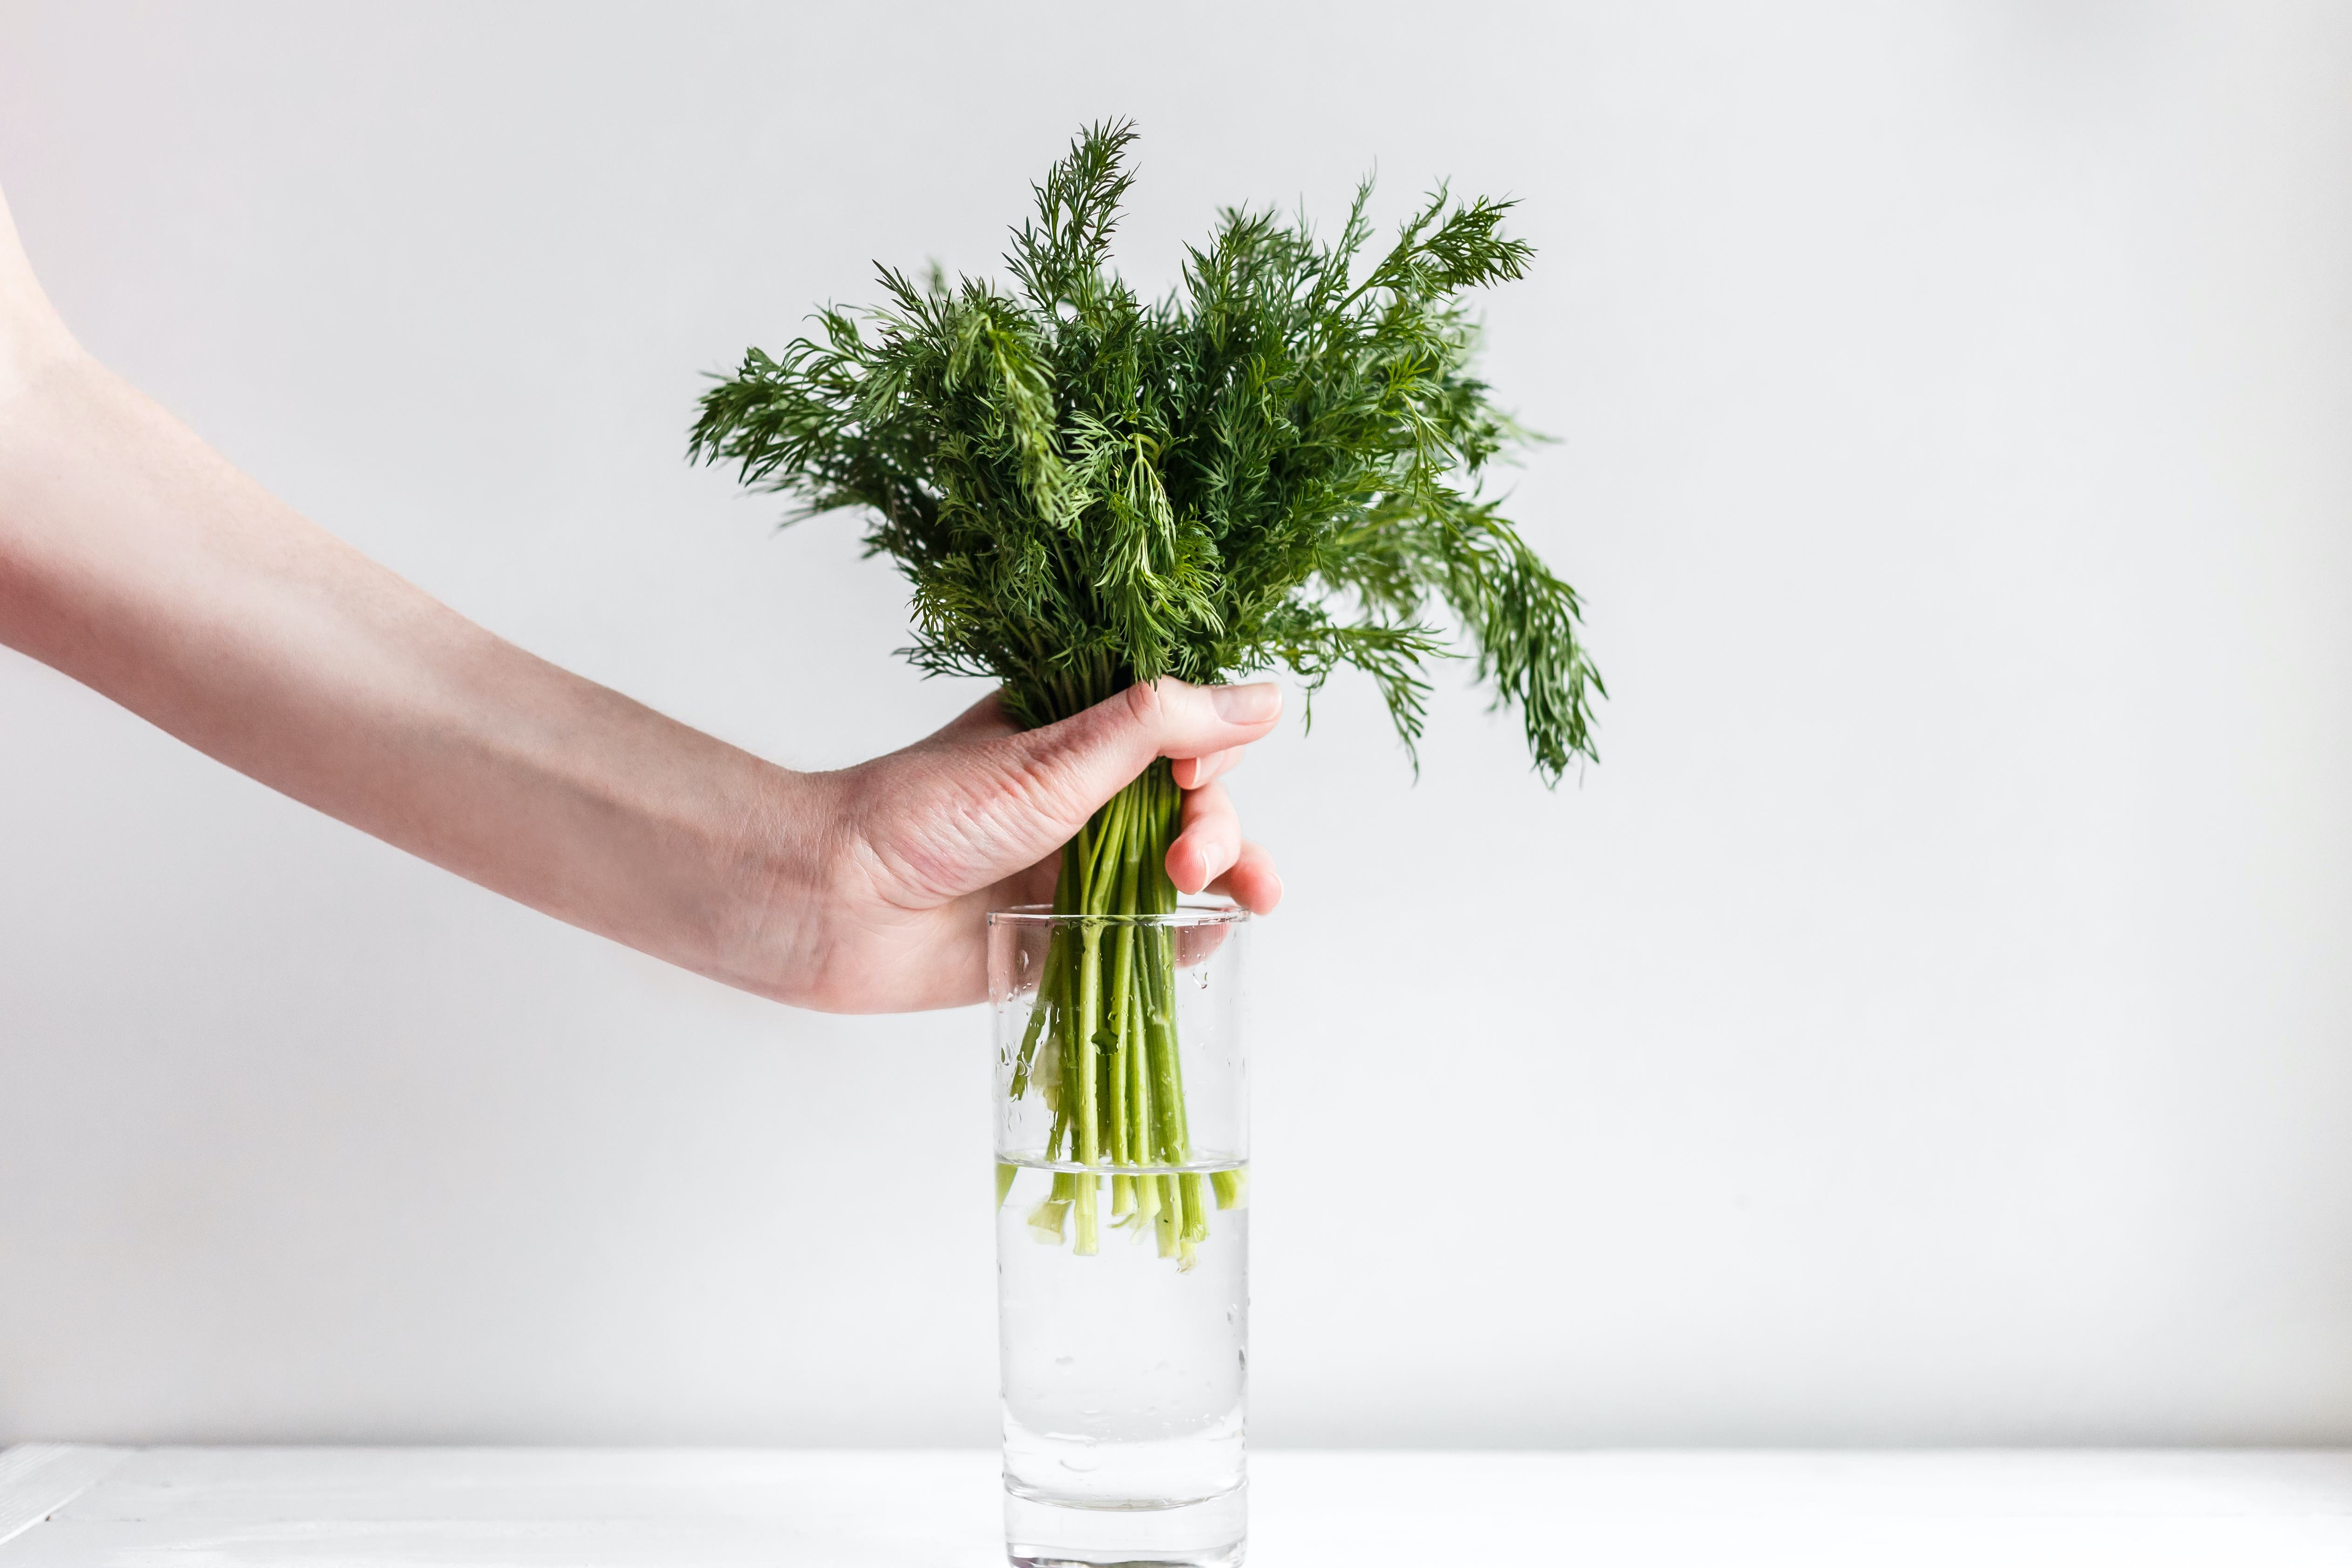 Hand holding fresh herbs over a glass of water